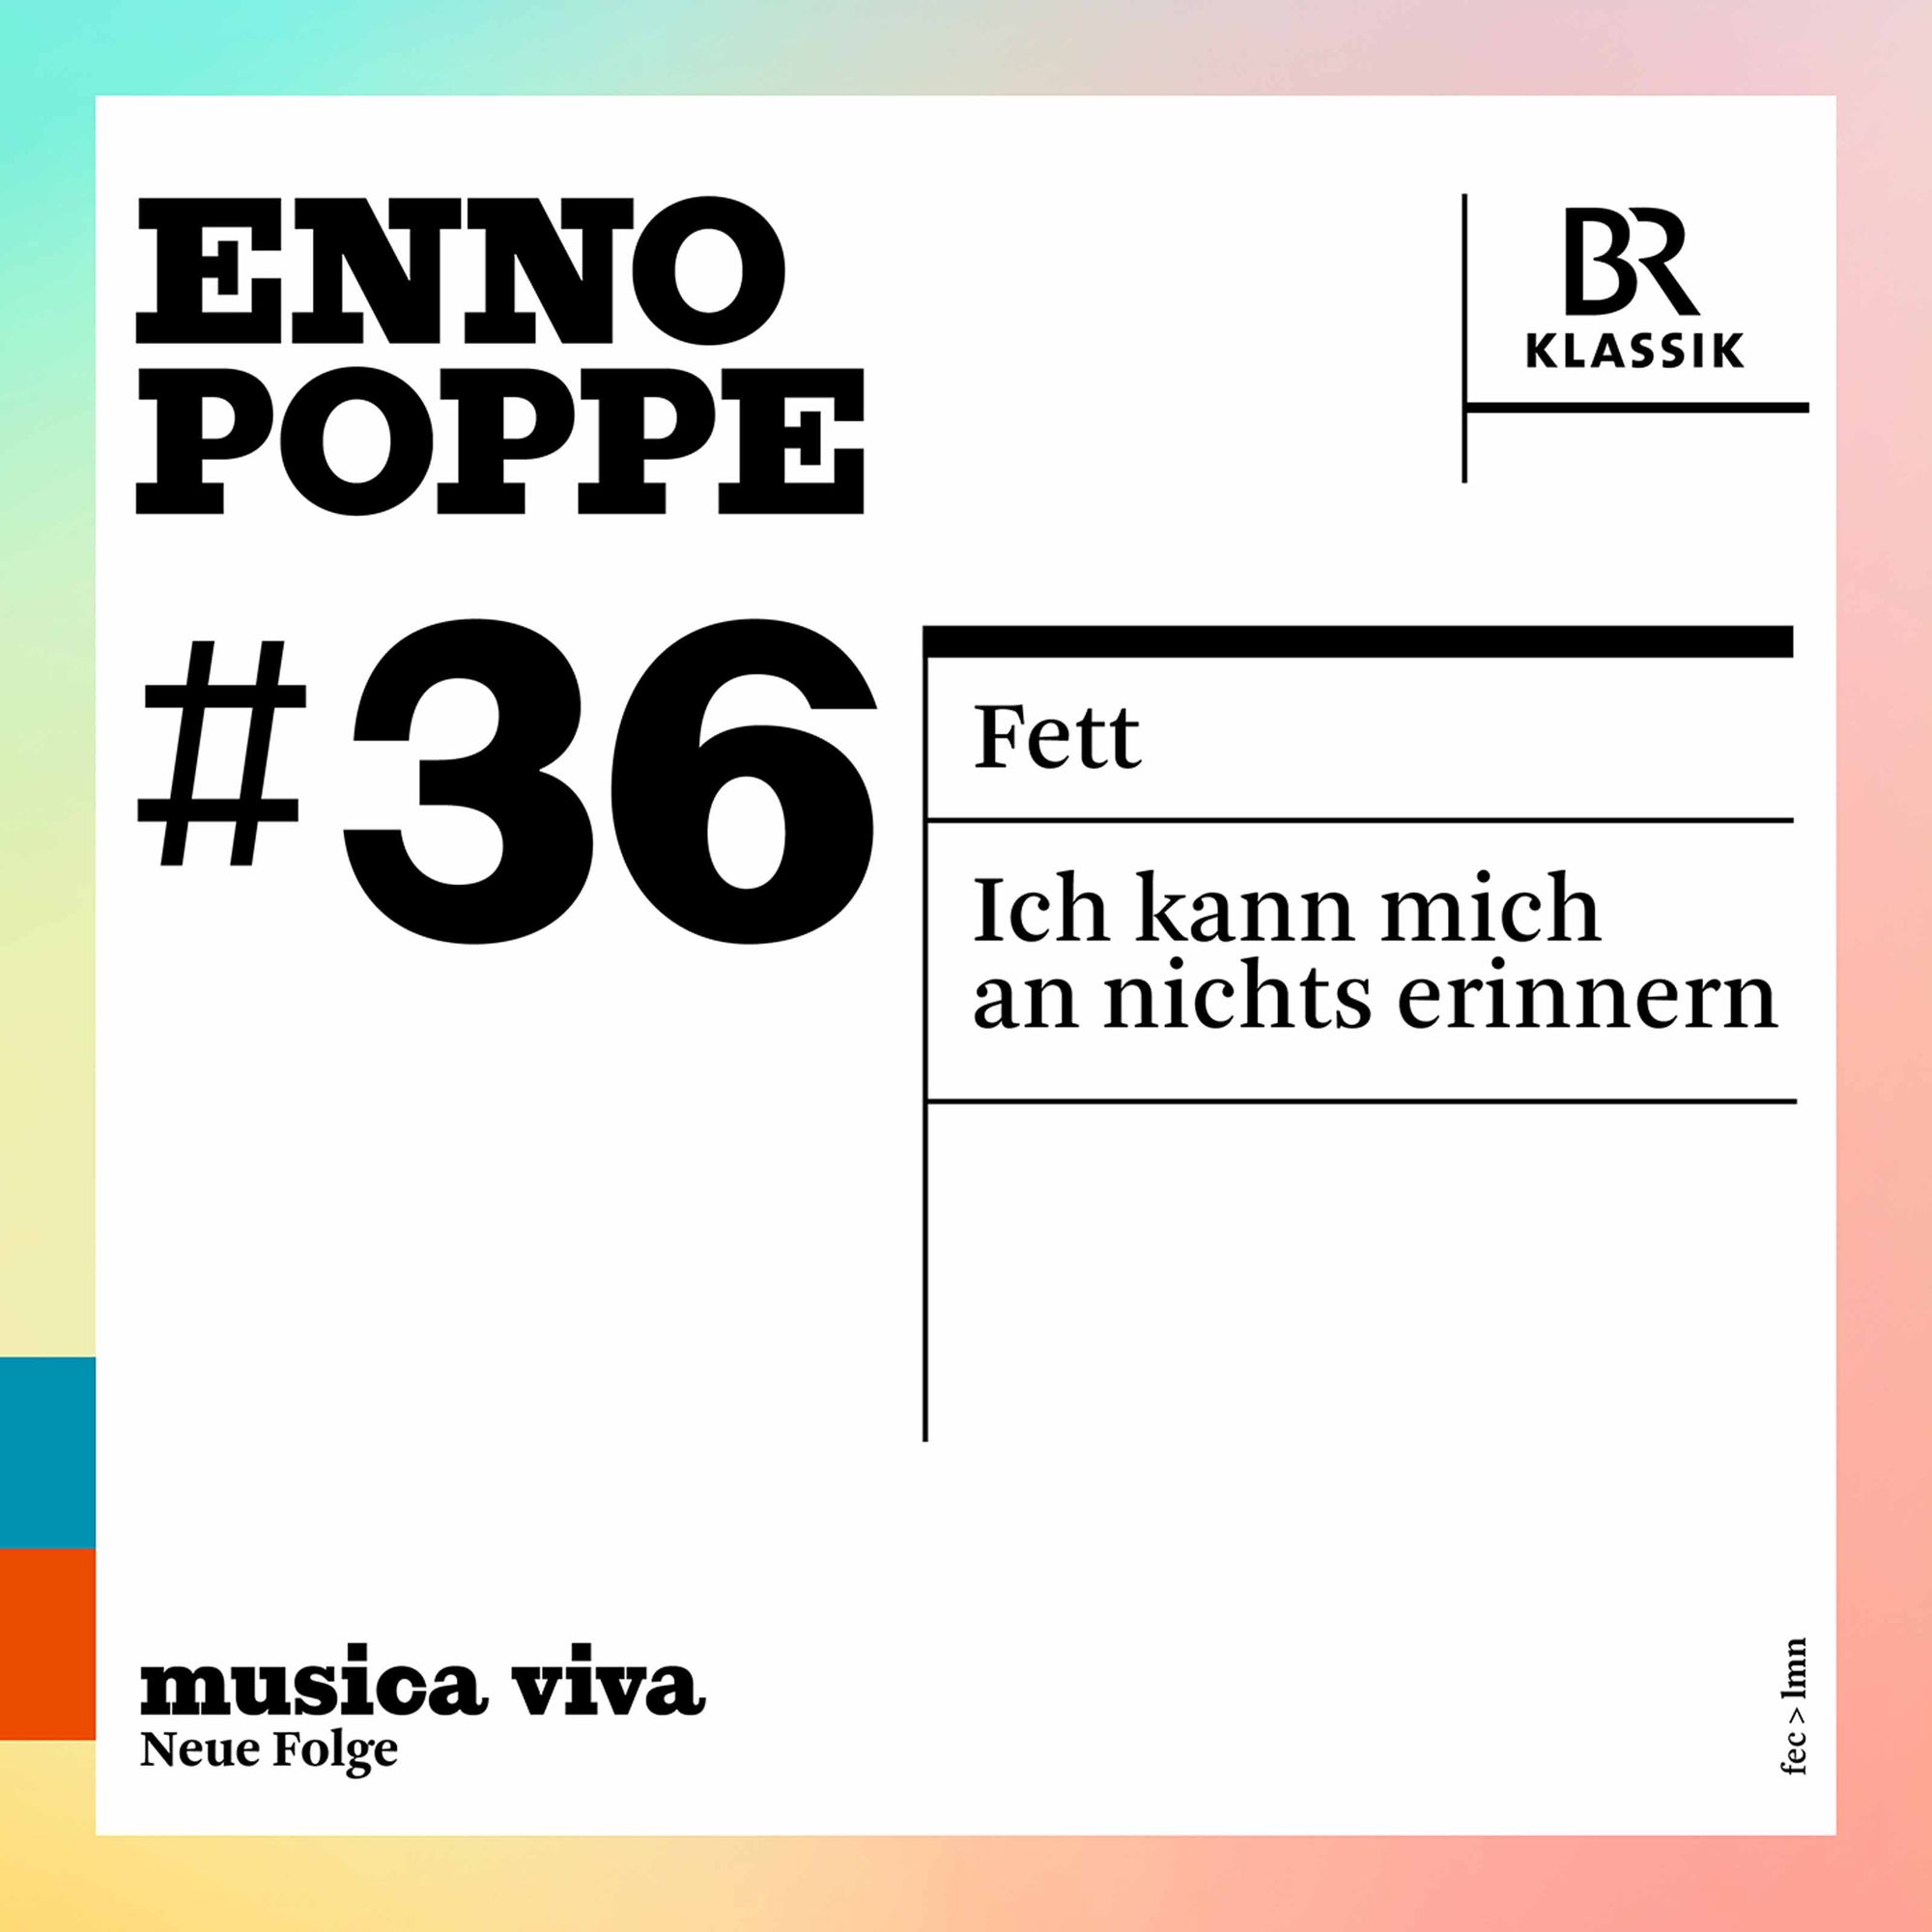 The Music of Enno Poppe